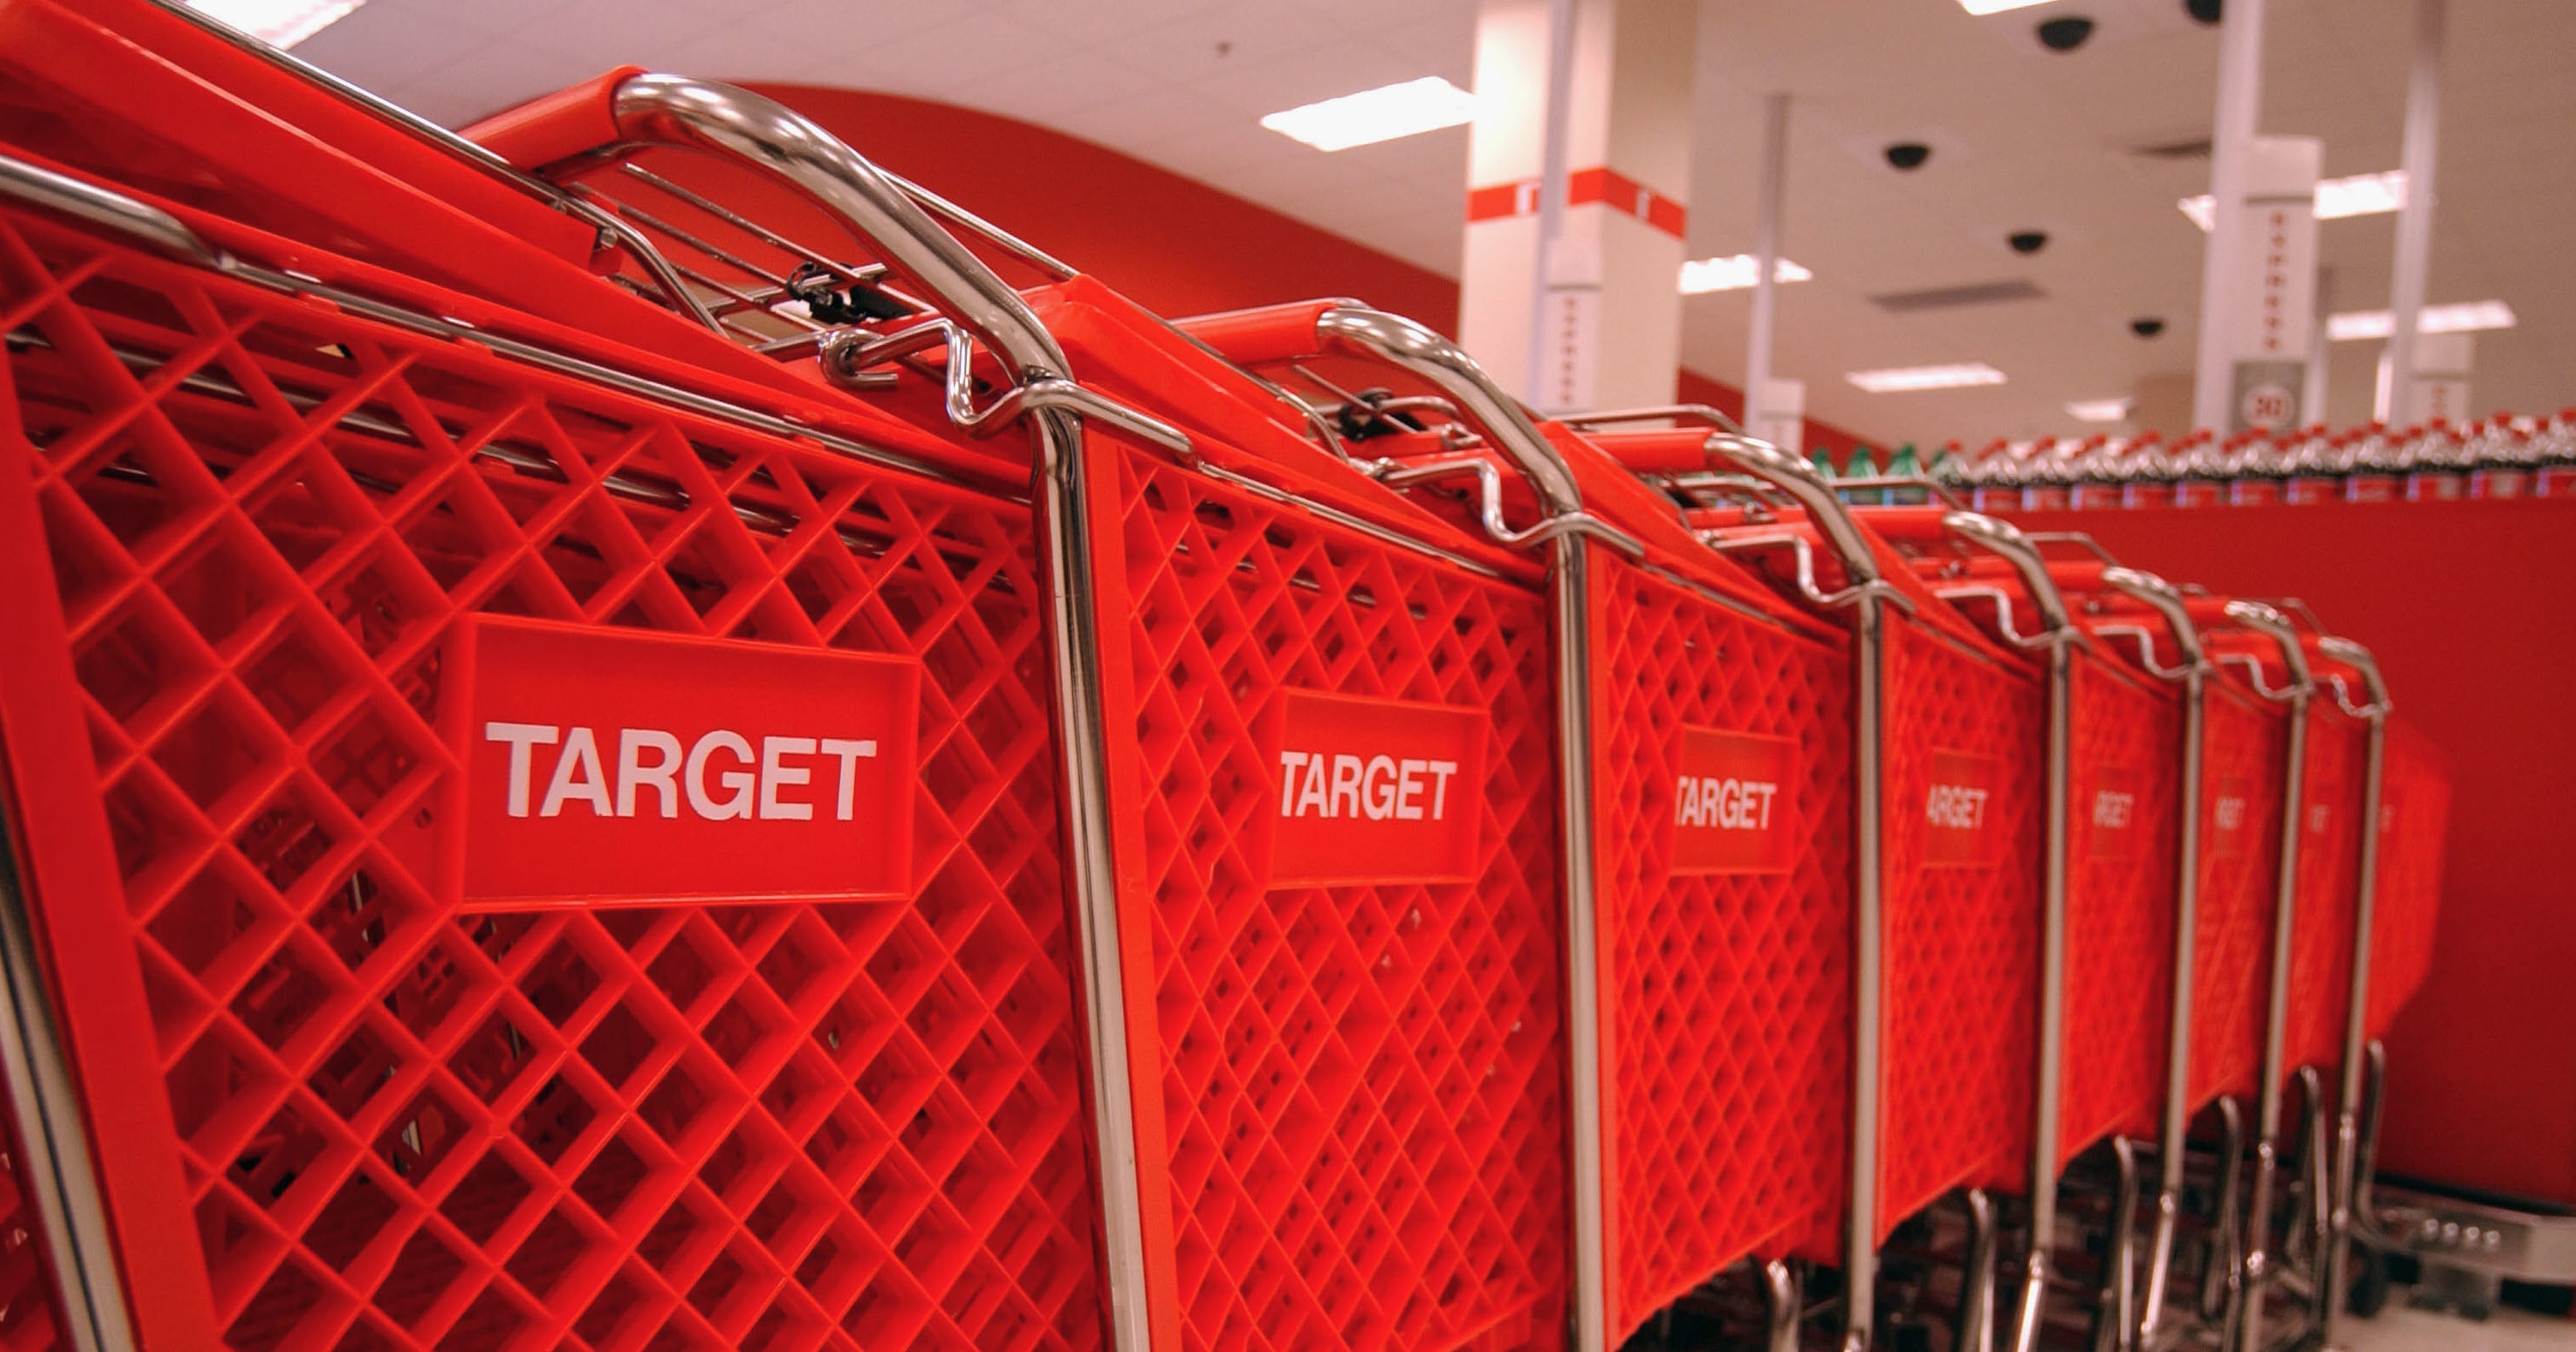 The Reason You Can’t Shop For “Just One Thing” at Target